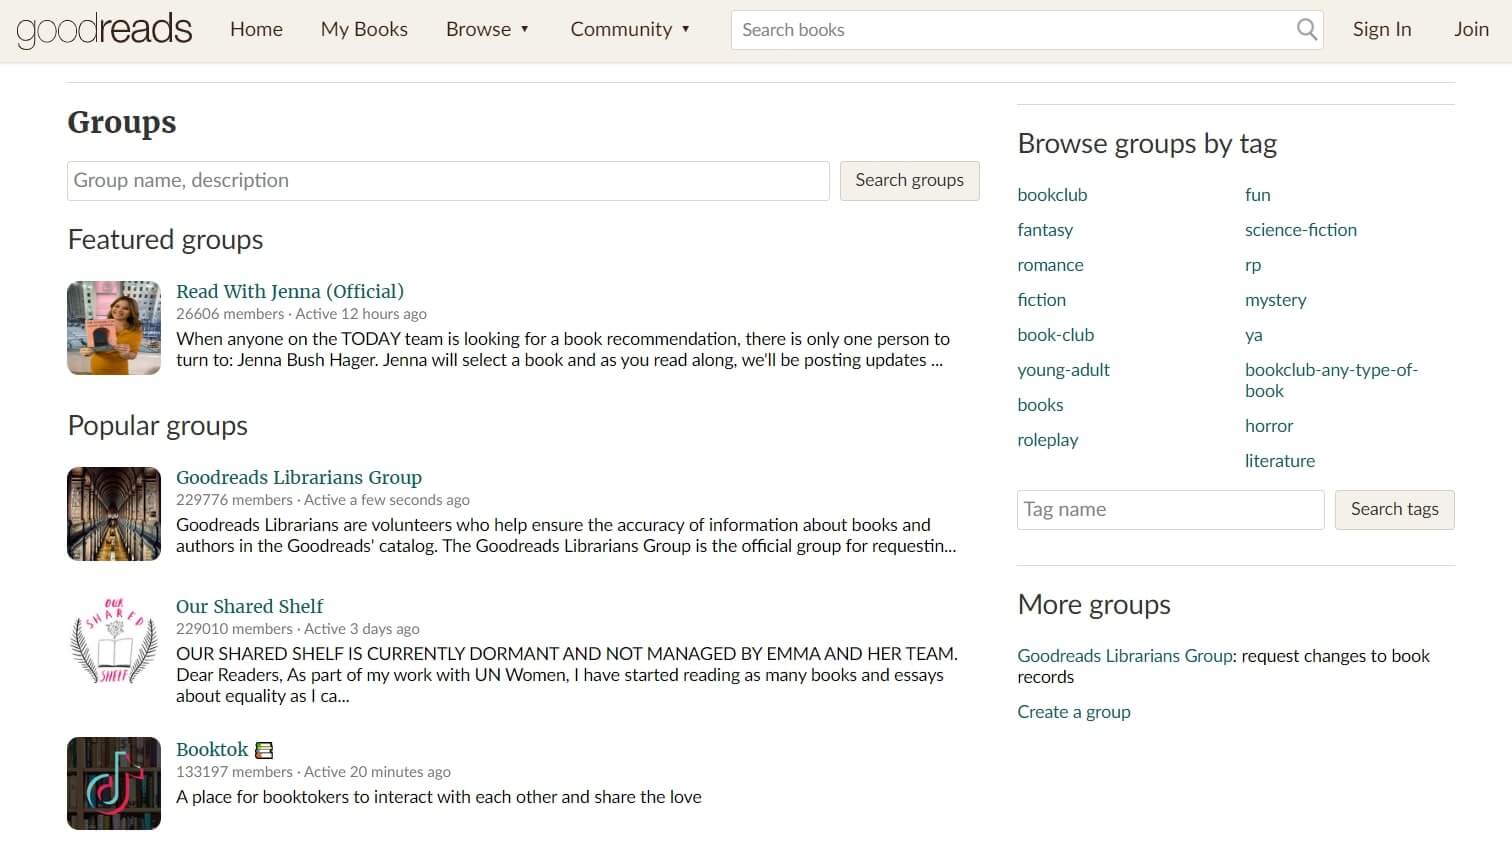 A screenshot of Goodreads' community groups page.